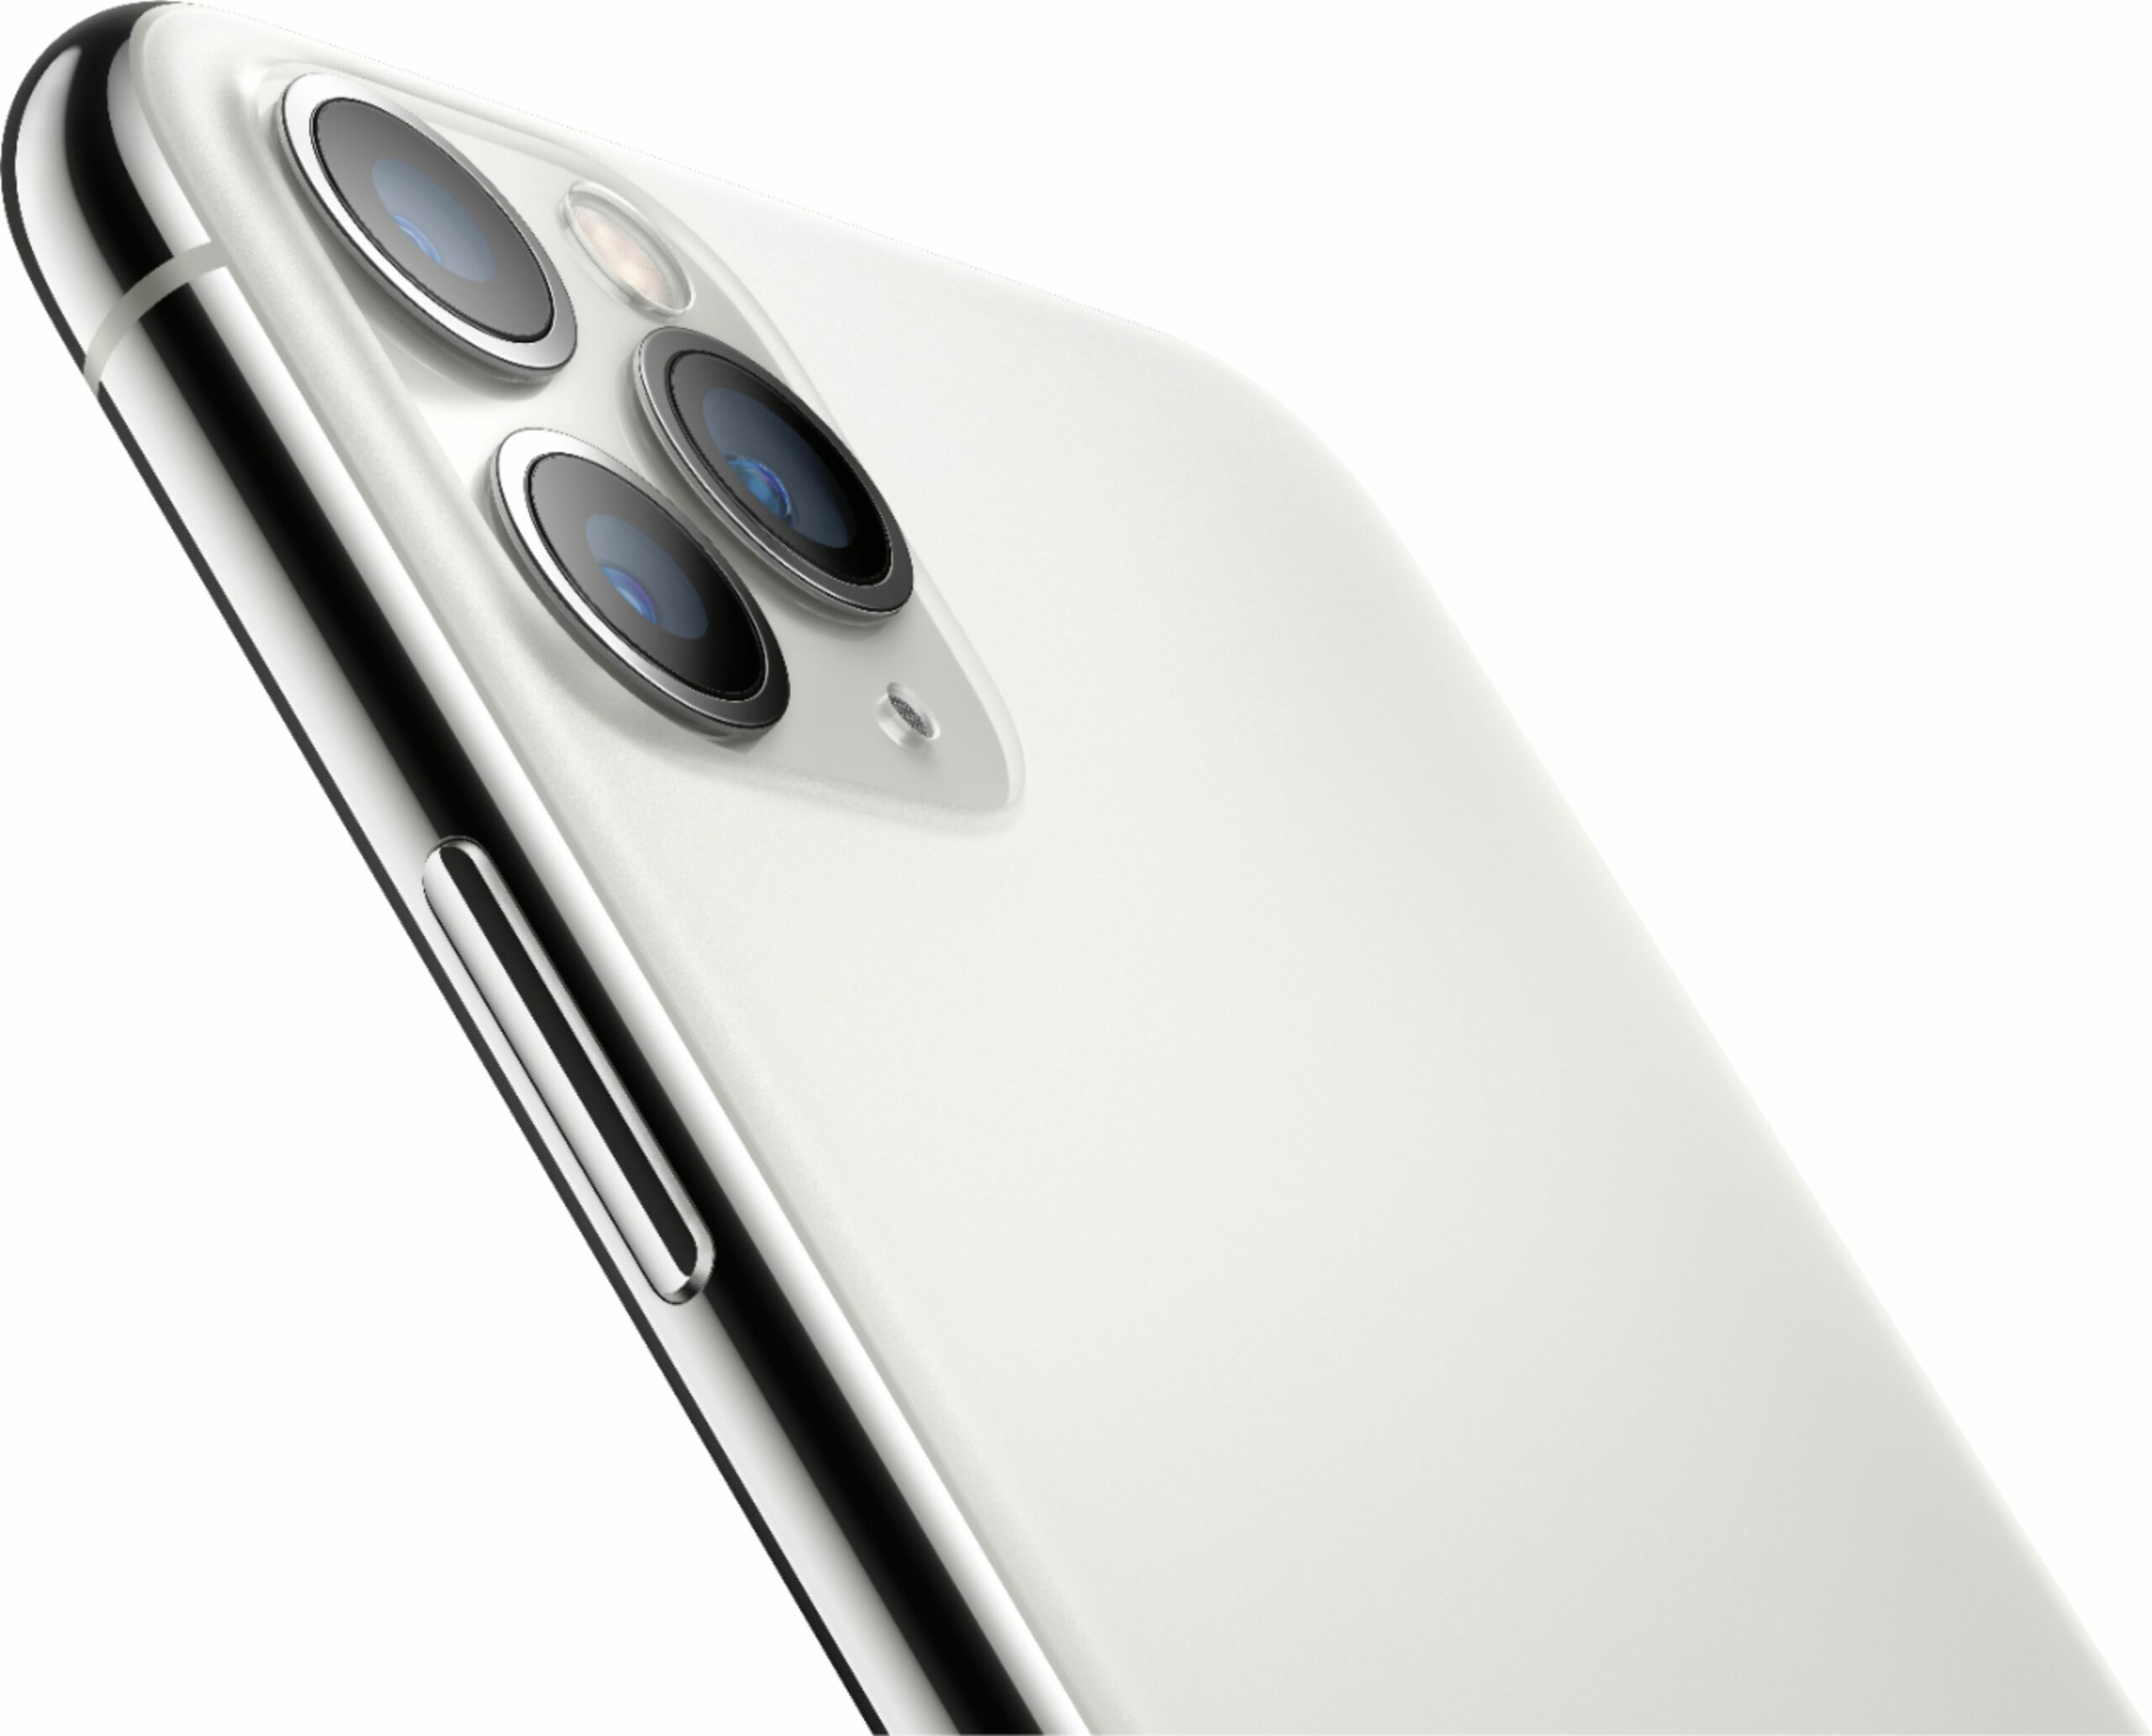 Catch up on all the iPhone 12 rumors before Apple’s event tomorrow